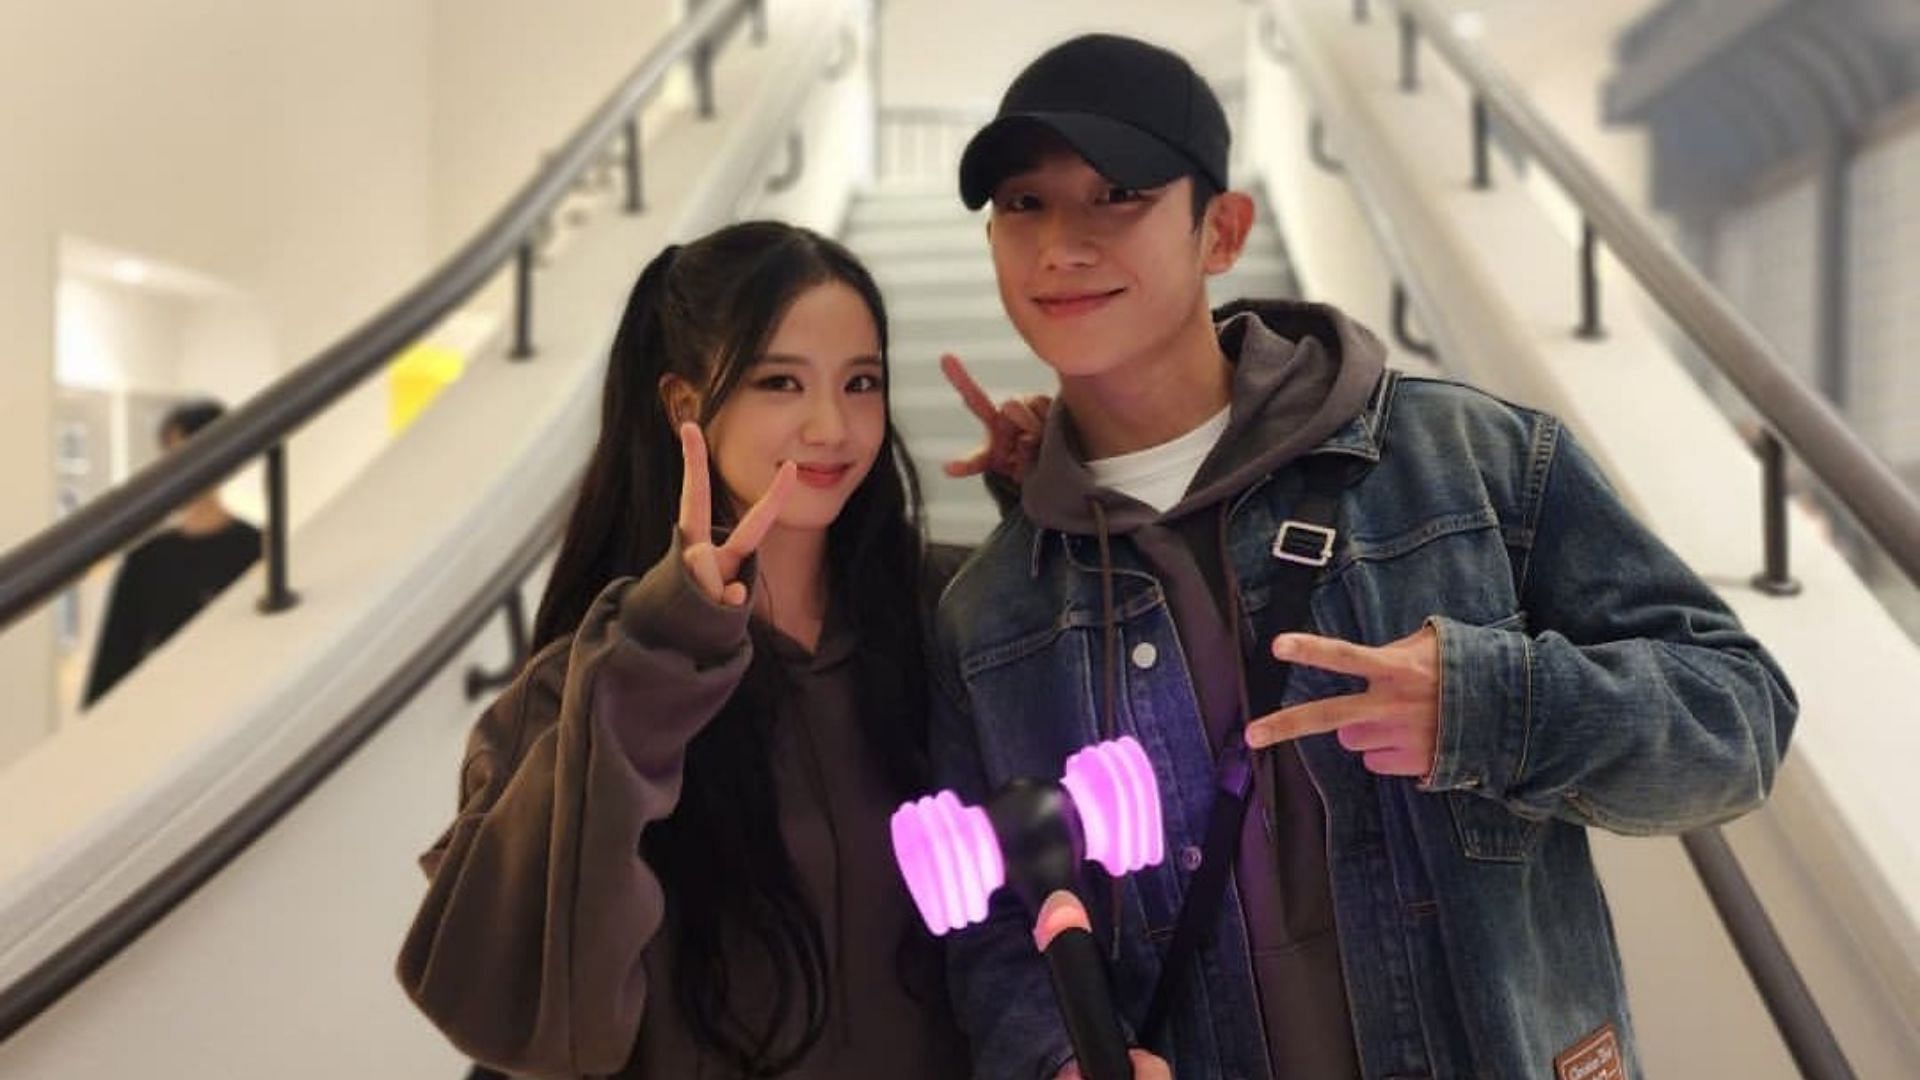 Fellow Snowdrop actor Jung Hae-in clicked a picture with Jisoo to show his support for the members (Image via Instagram/holyhaein)